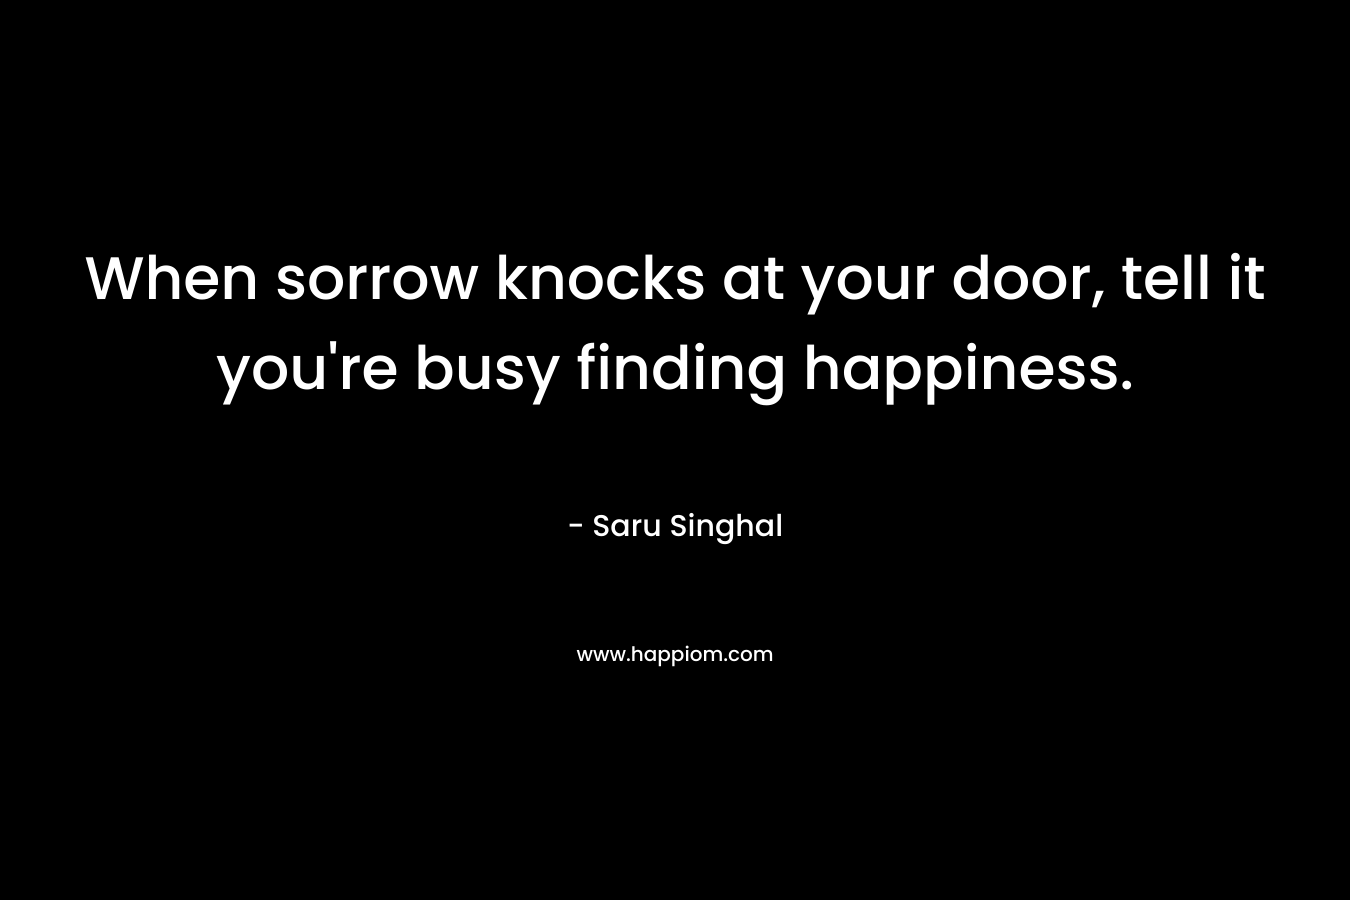 When sorrow knocks at your door, tell it you're busy finding happiness.